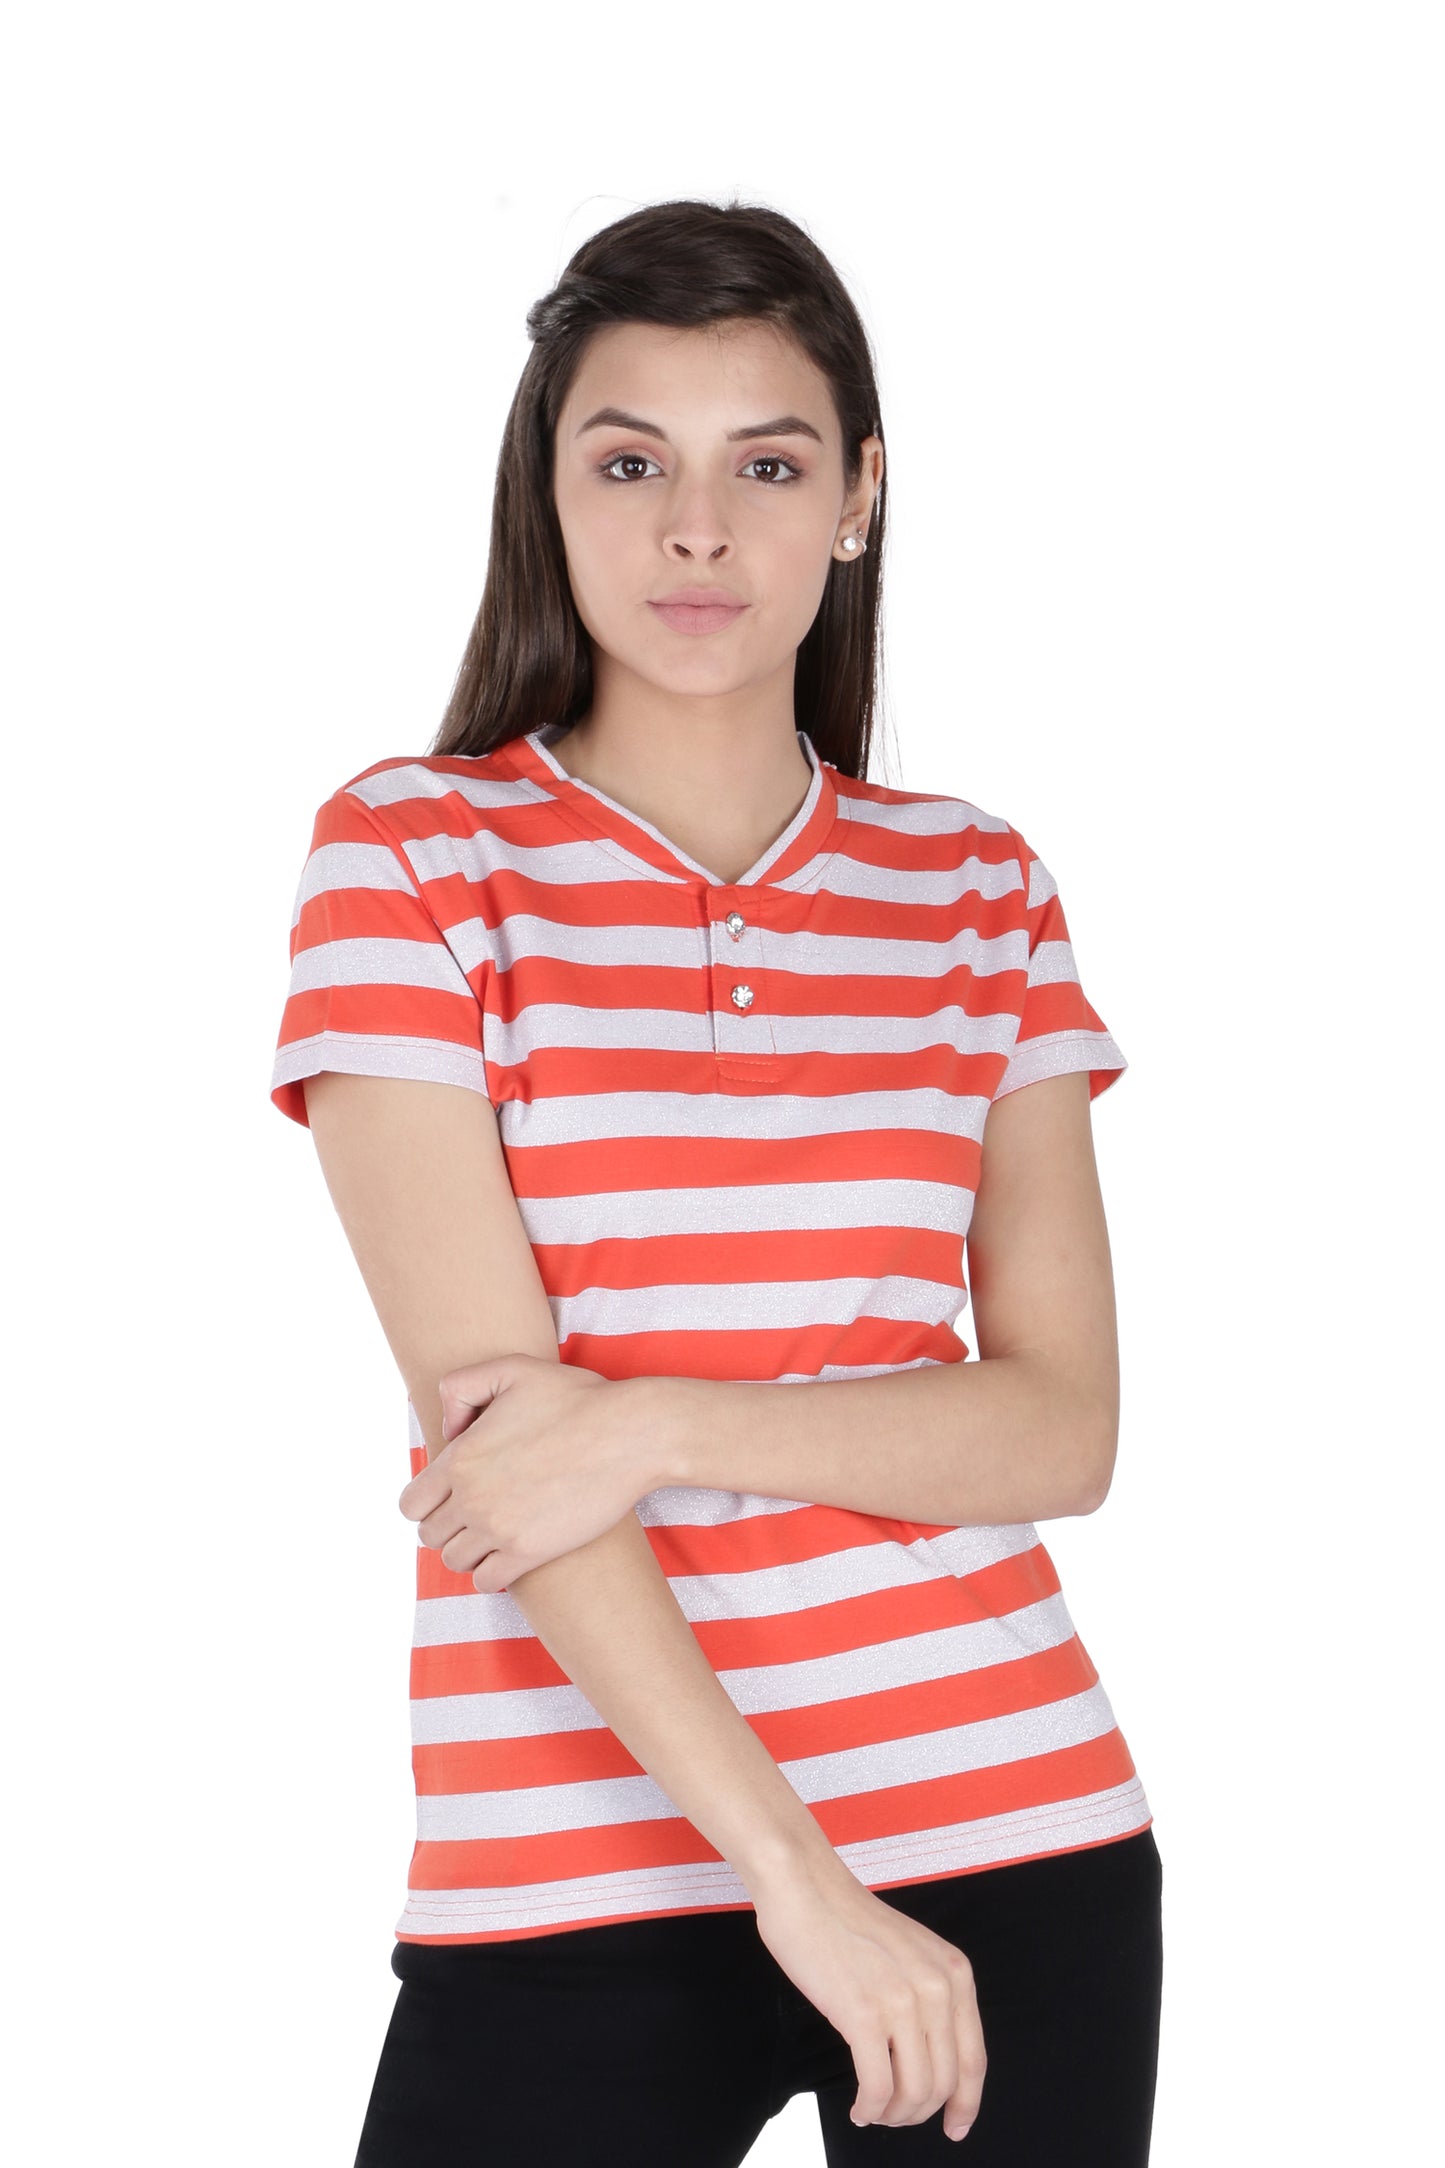 NEO GARMENTS WOMEN STRIPED GLOW BUTTON UP V-NECK T-SHIRT | SIZE FROM - XS - 30" TO L - 36".